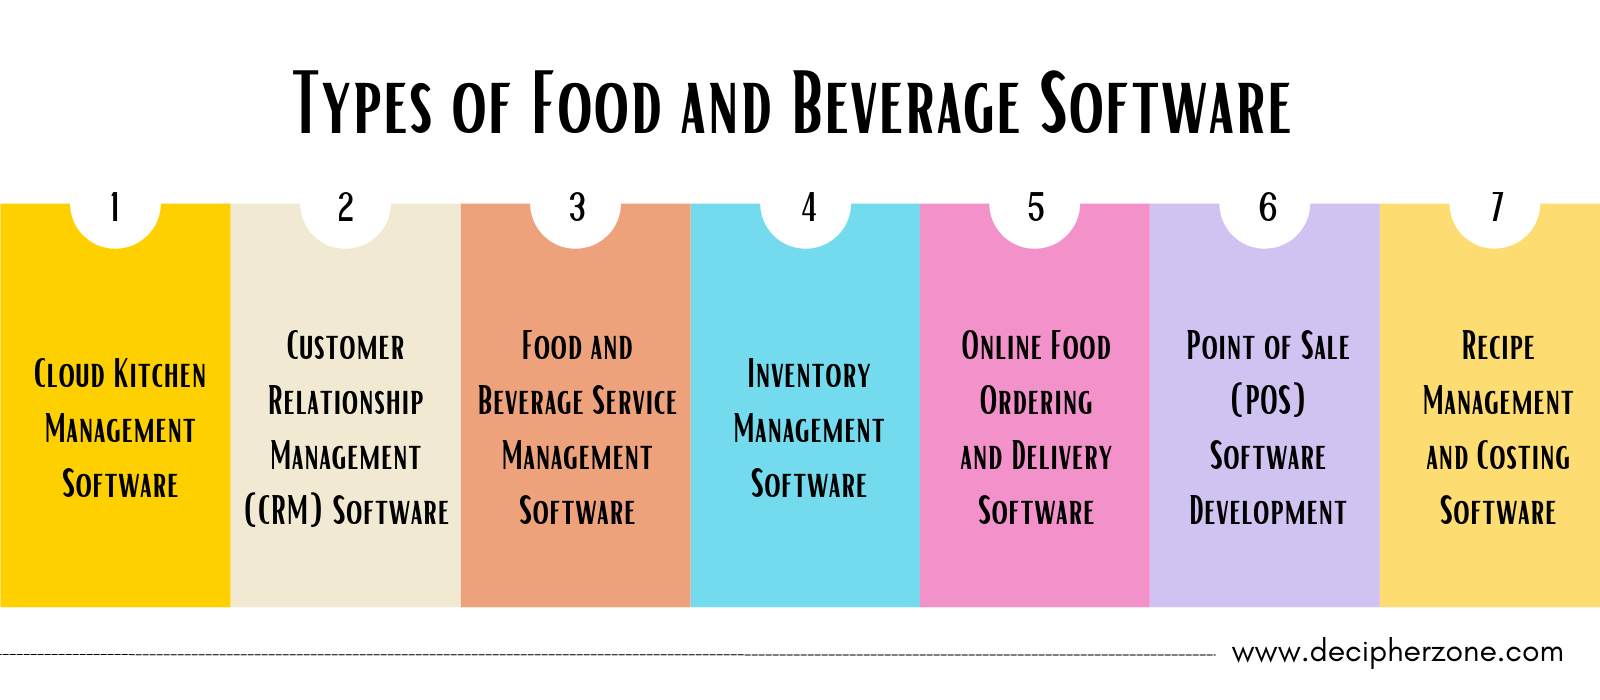 Types of Food and Beverage Software Development